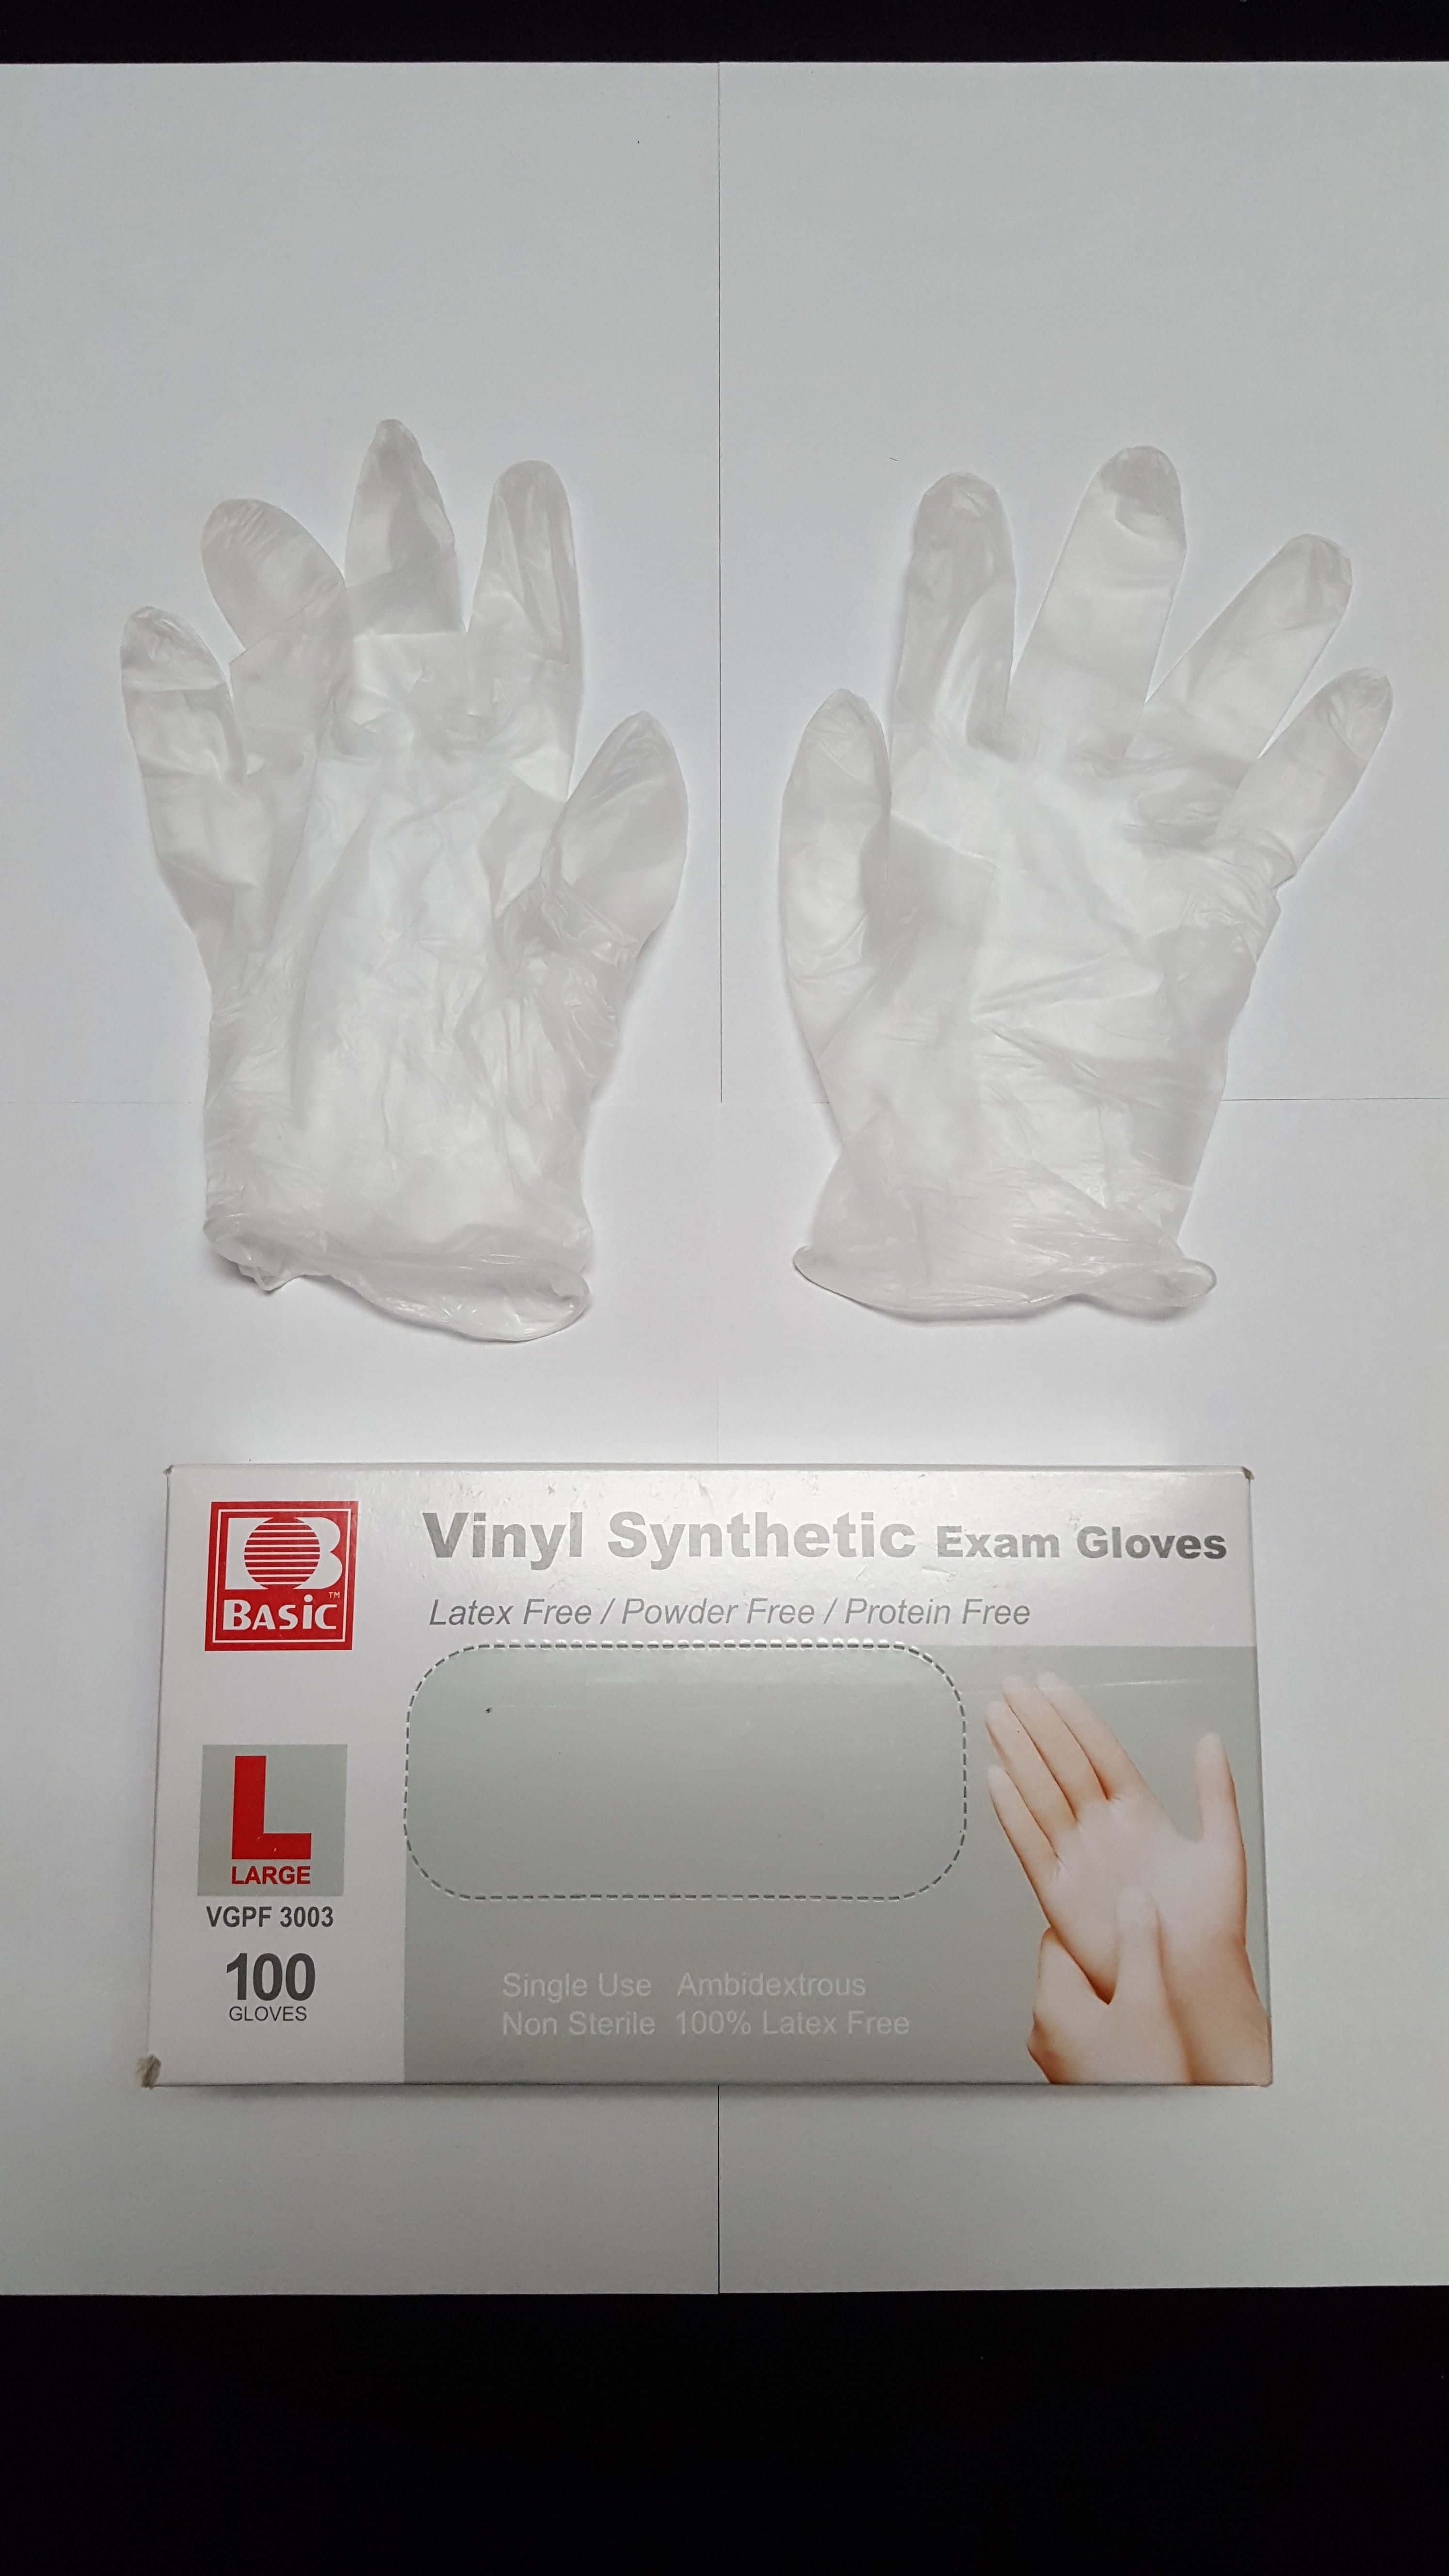 Extended Black Friday Sale!! 10 boxes, Clear Vinyl gloves!